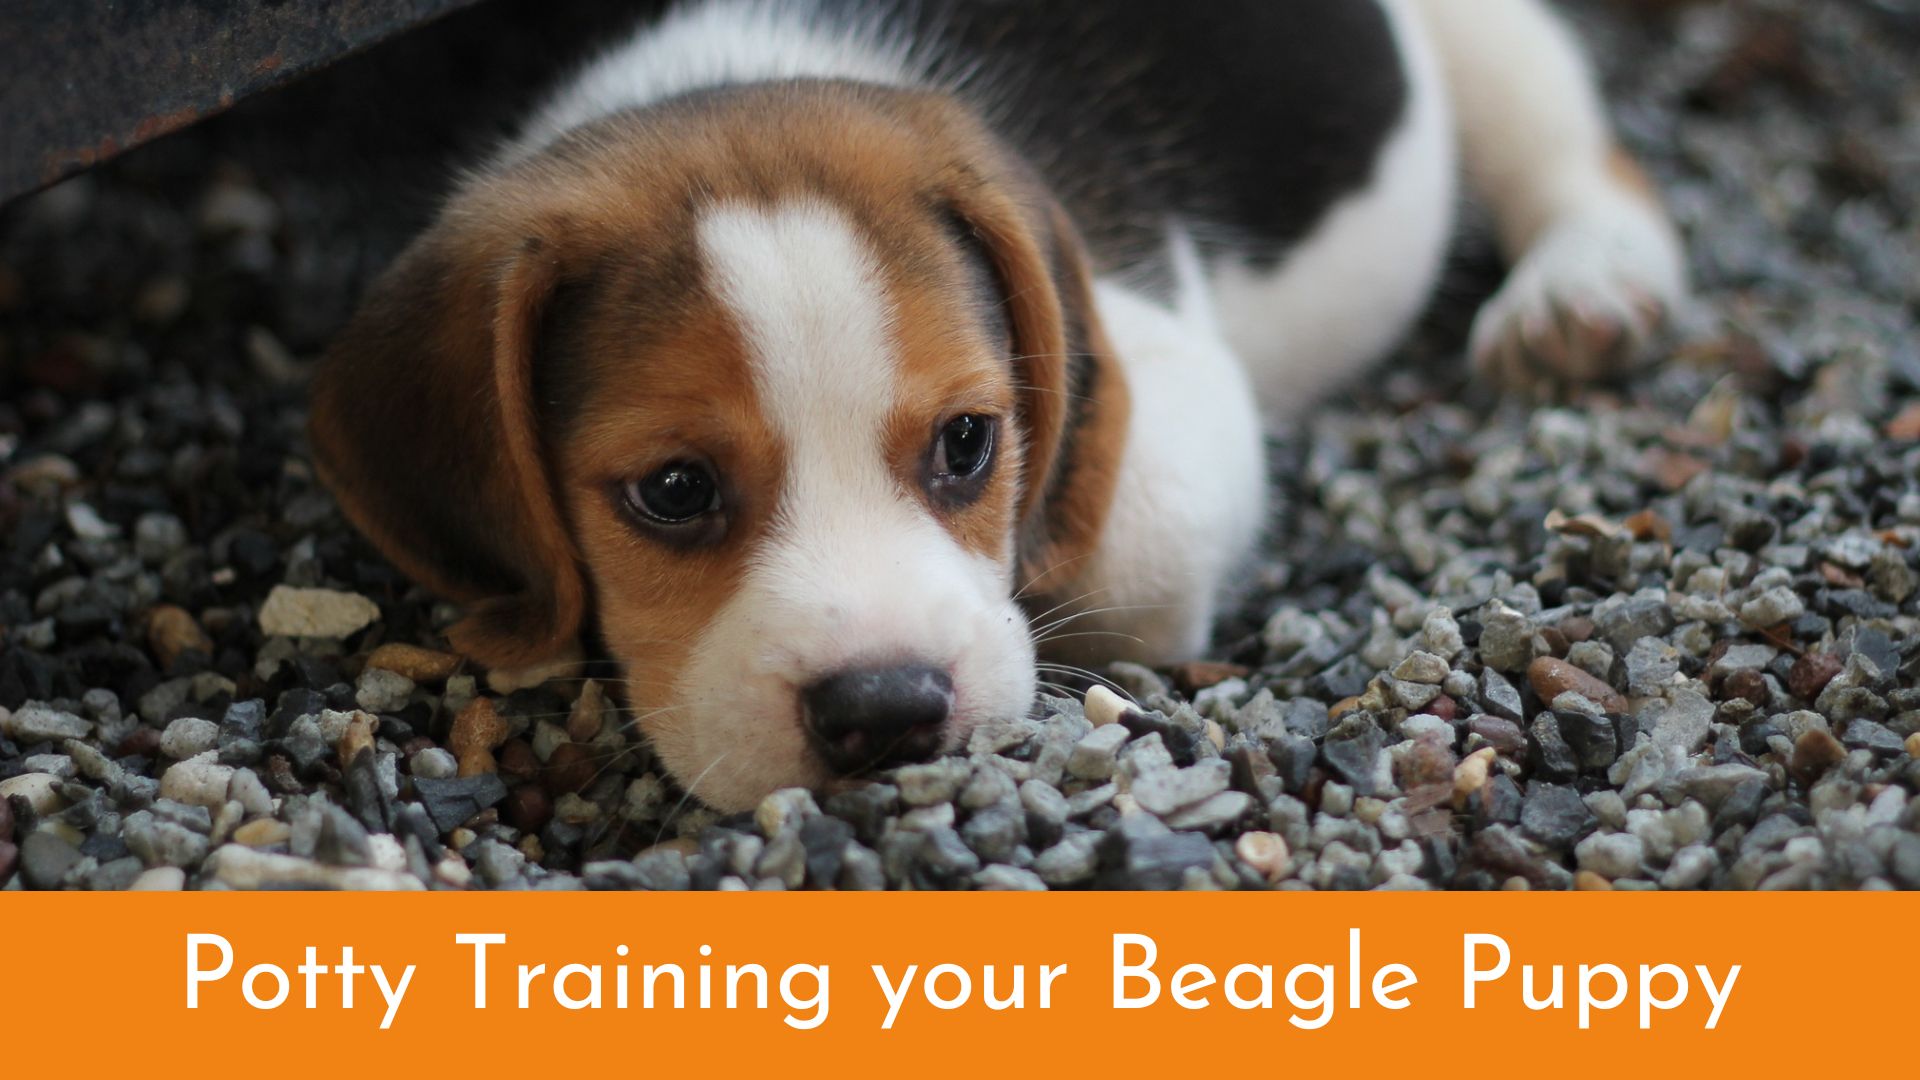 How to Potty Train Your Beagle Puppy: Tips and Tricks from Owners